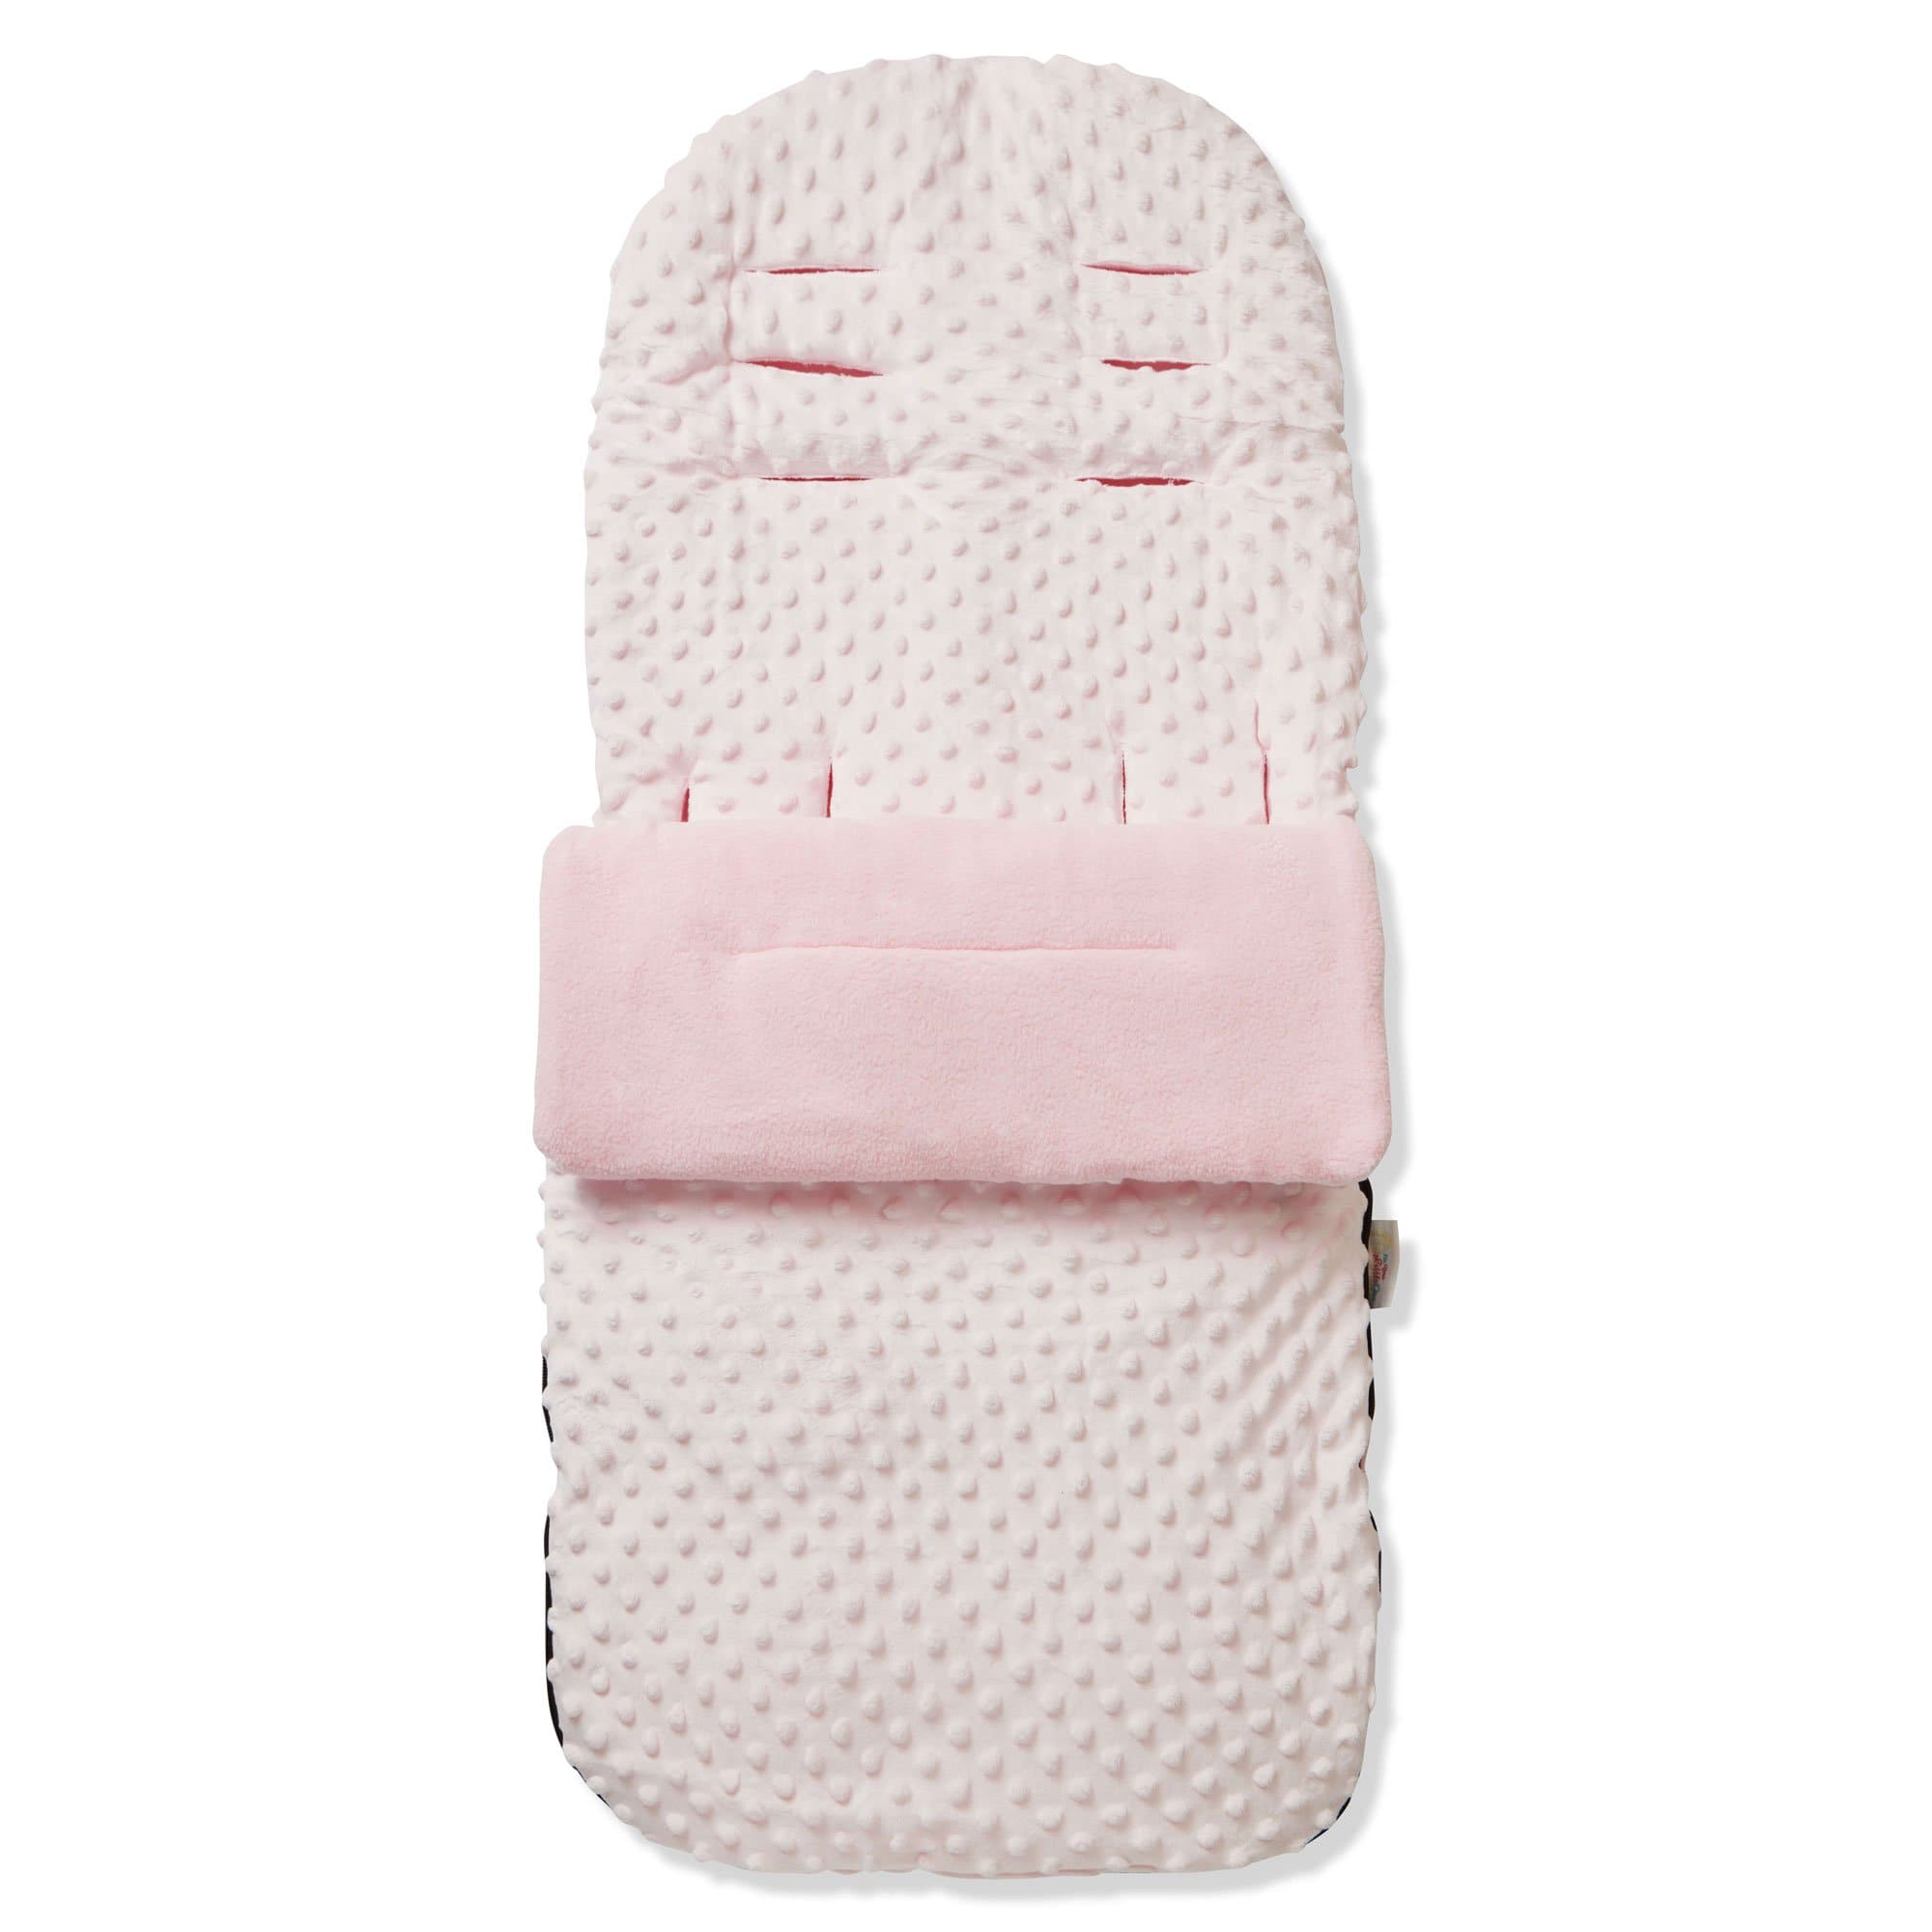 Dimple Footmuff / Cosy Toes Compatible with Brevi - Pink / Fits All Models | For Your Little One